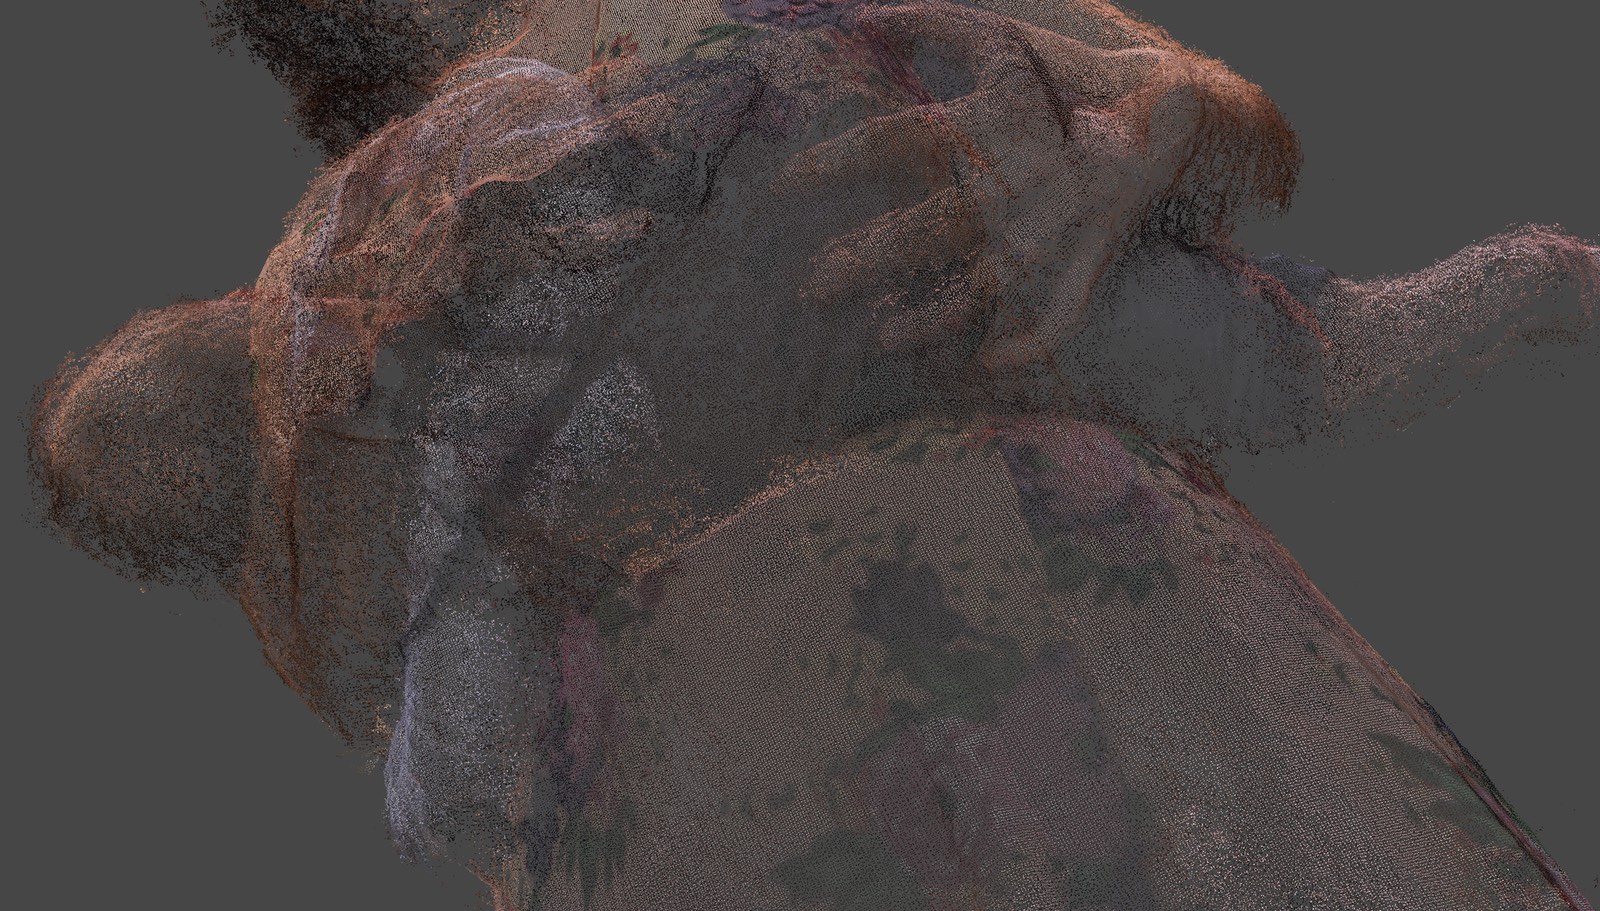 This project makes heavy use of photogrammetry.